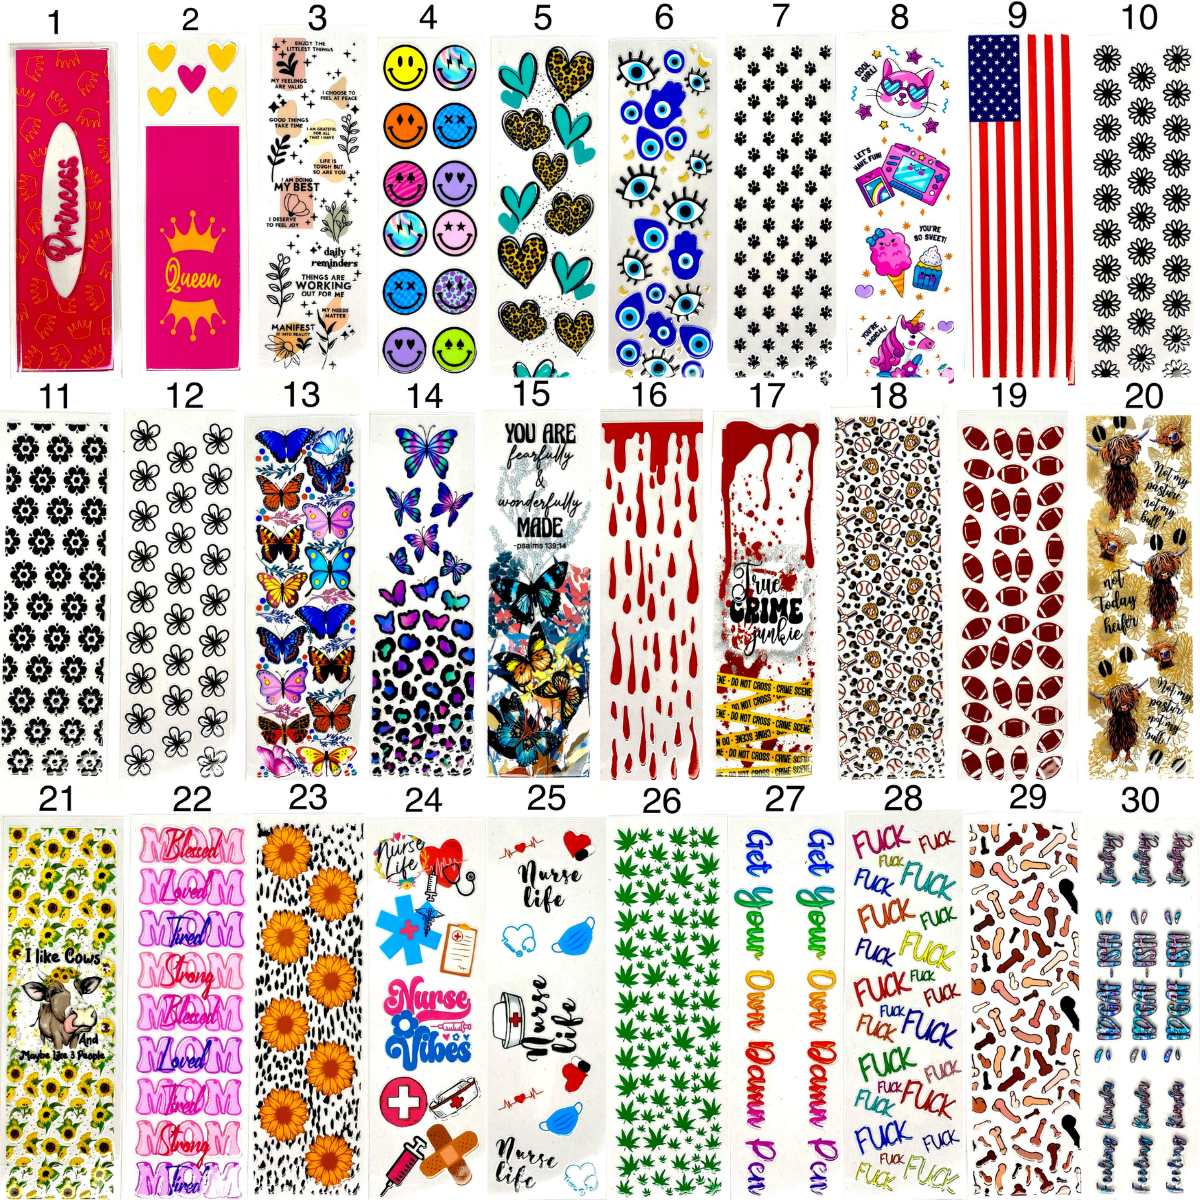 Uv Dtf Pen Wrap Decals 2 for $1.00 Various Designs